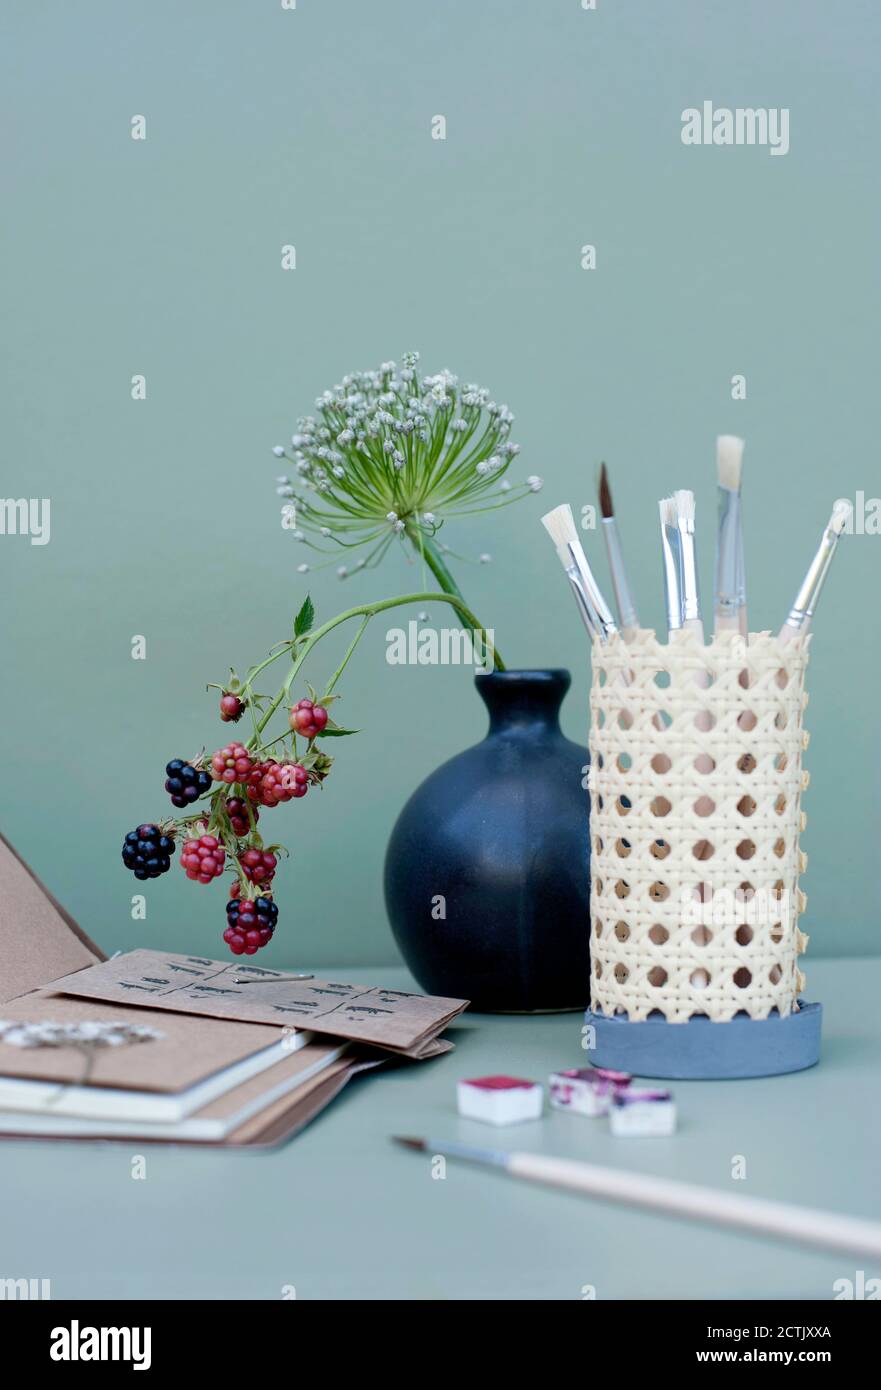 Note pad, vase with flowers and DIY rattan desk organizer with paintbrushes Stock Photo